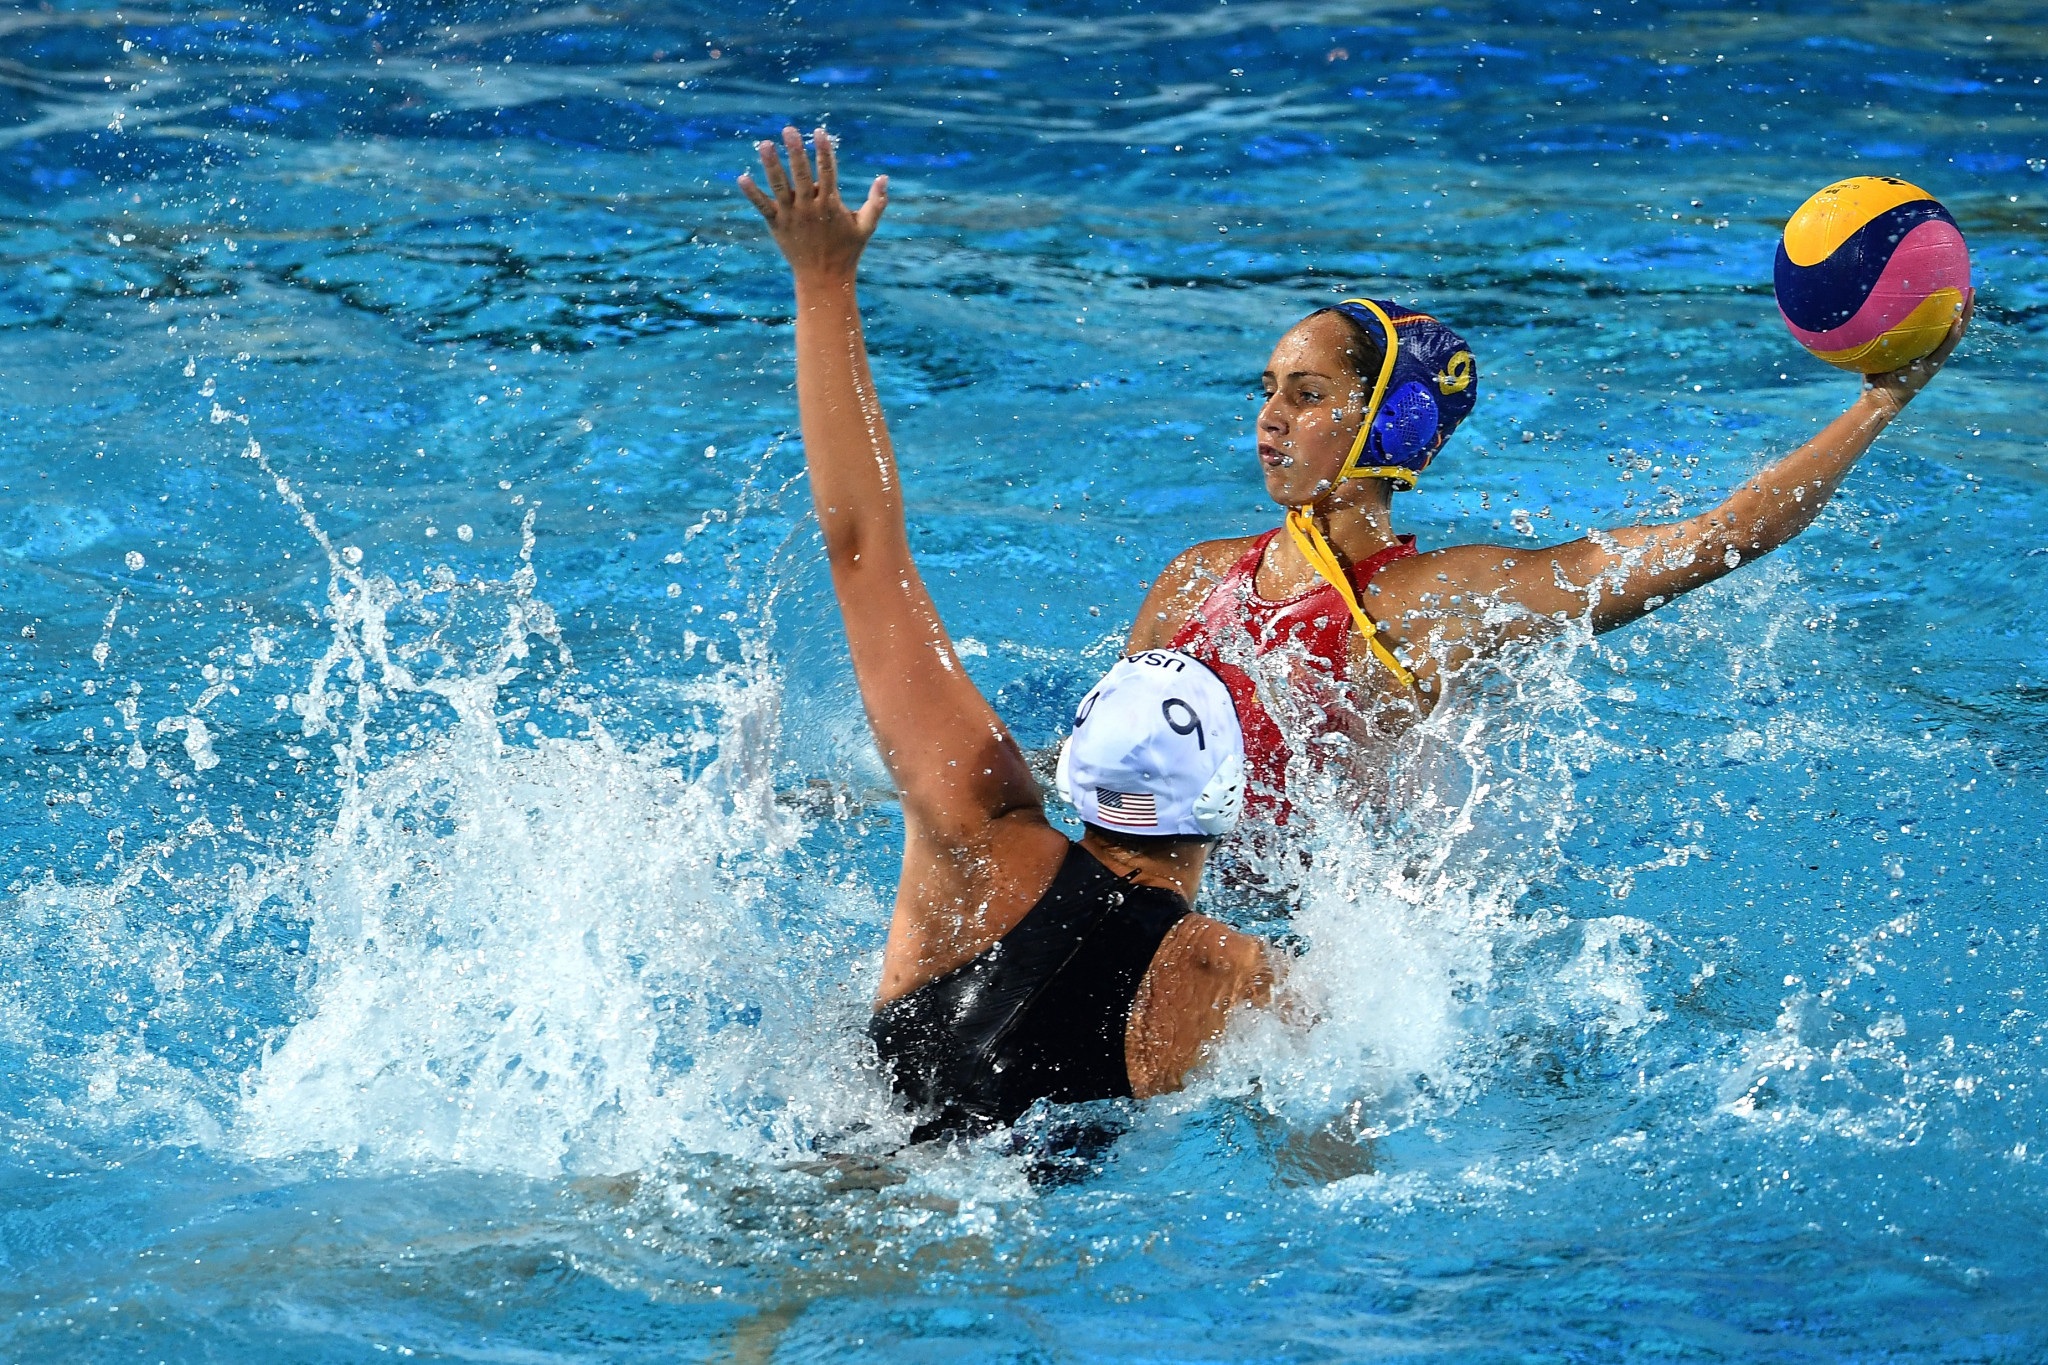 Spain qualify for Women's Water Polo World League Super Final